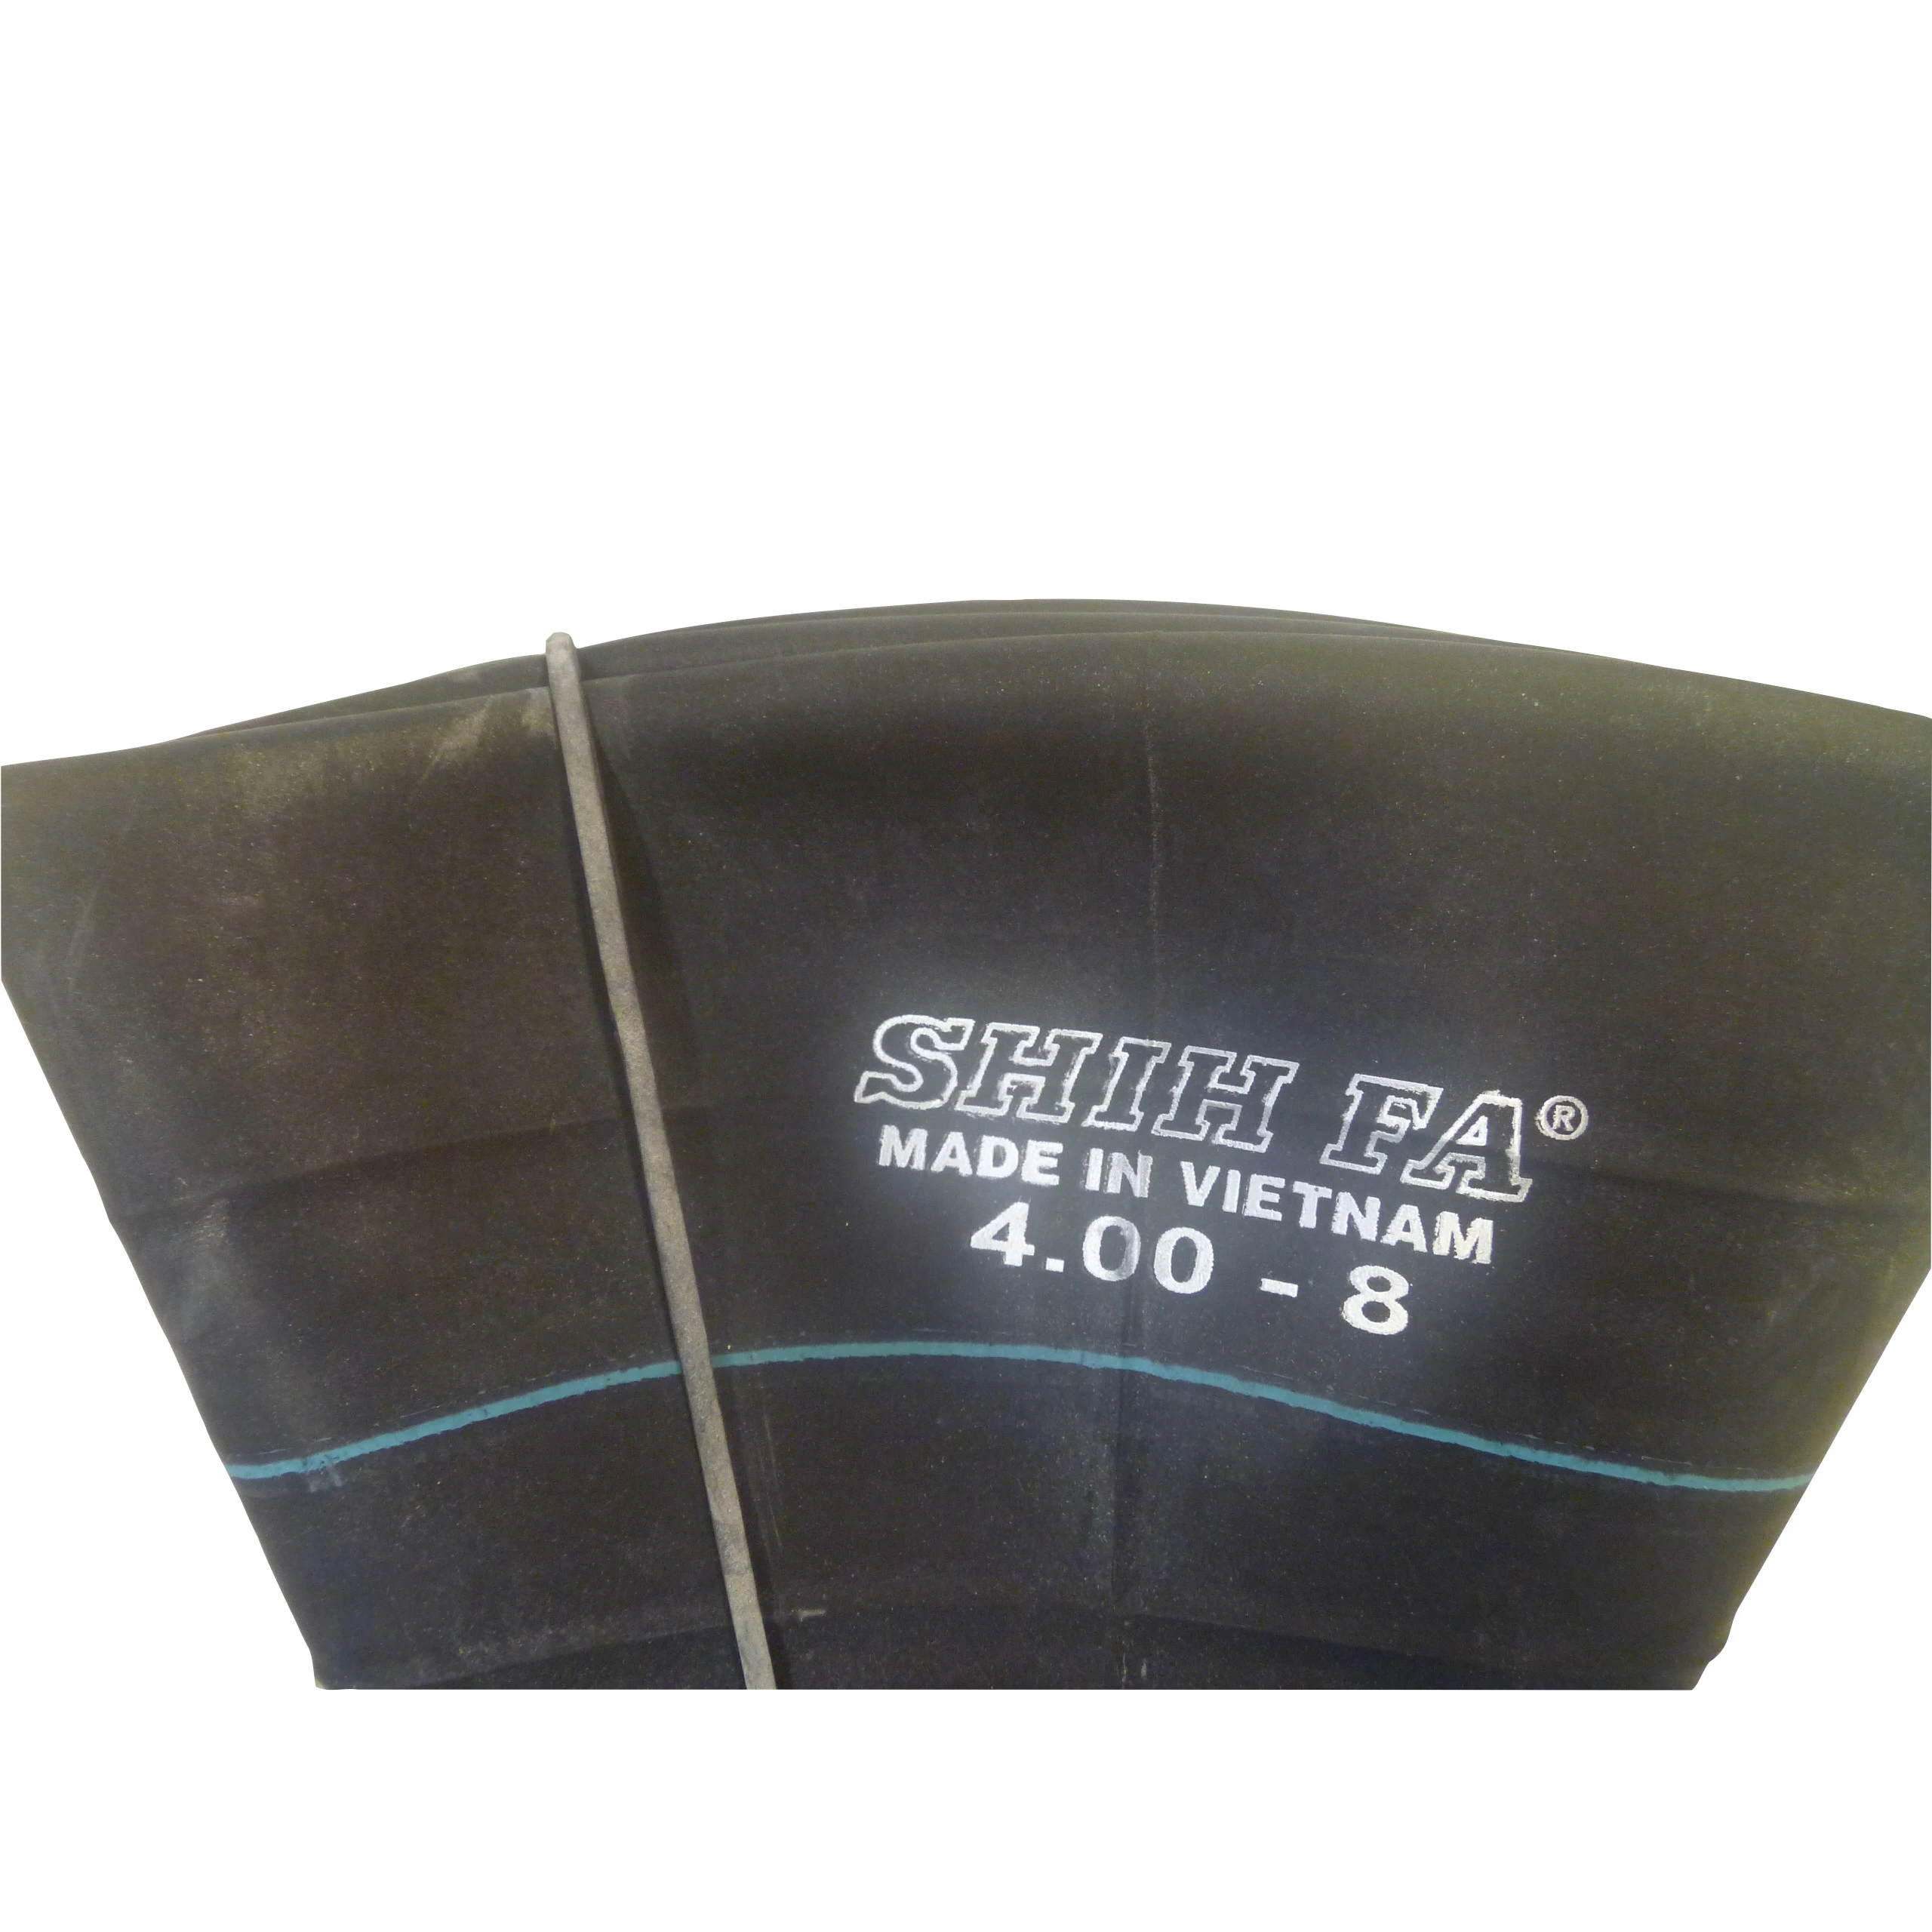 Black Round Professional Manufacture High Quality Rubber Material Motorcycle Tyre Inner Tube